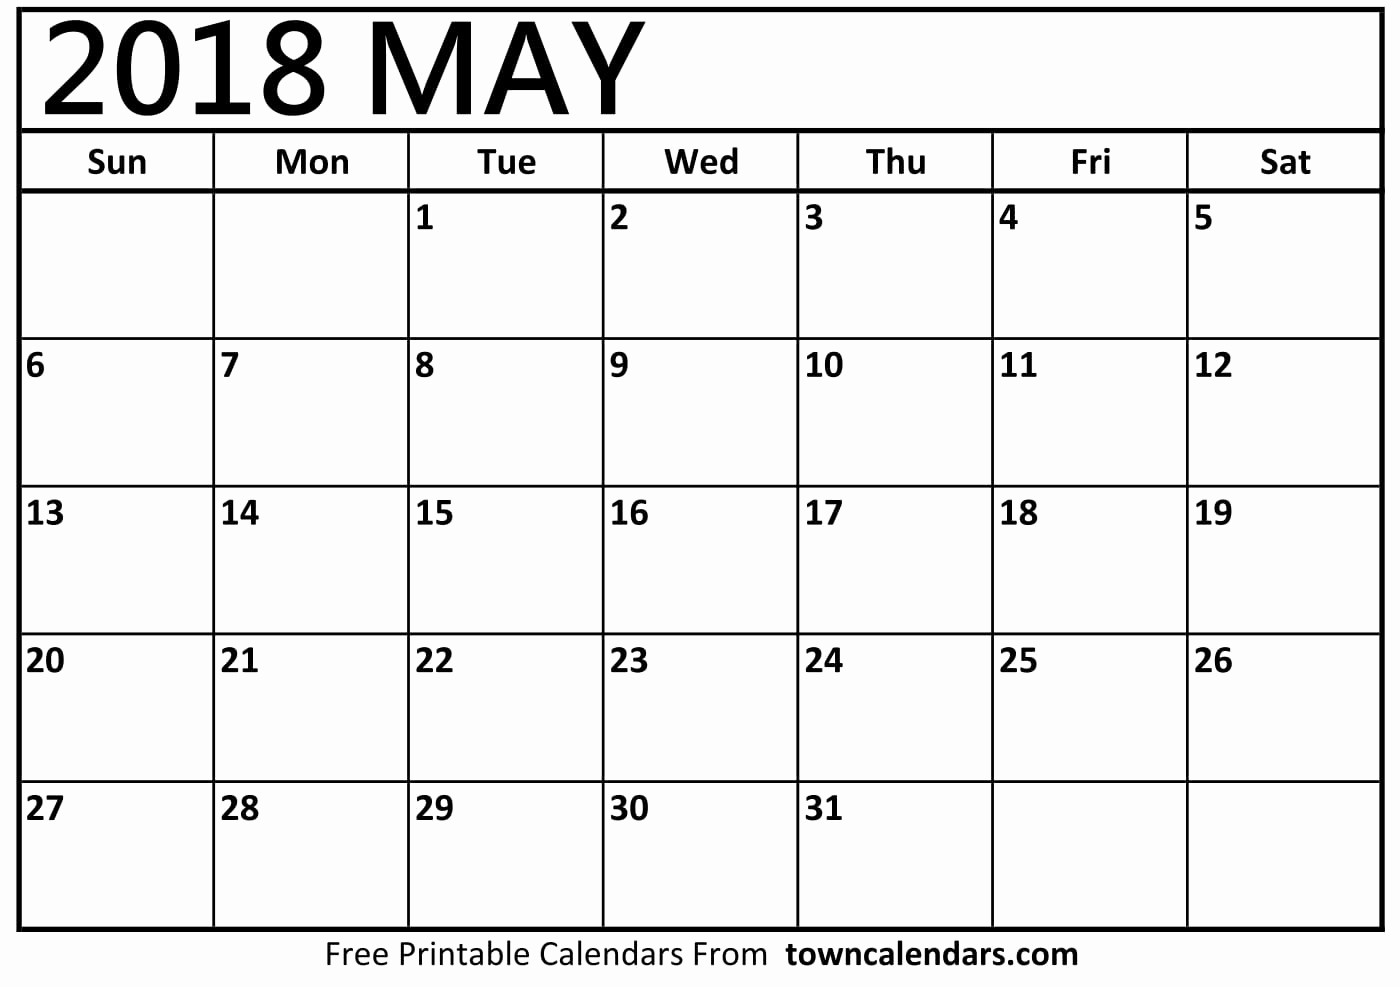 Free May 2018 Calendar Template Unique Free 5 May 2018 Calendar Printable Template Pdf source